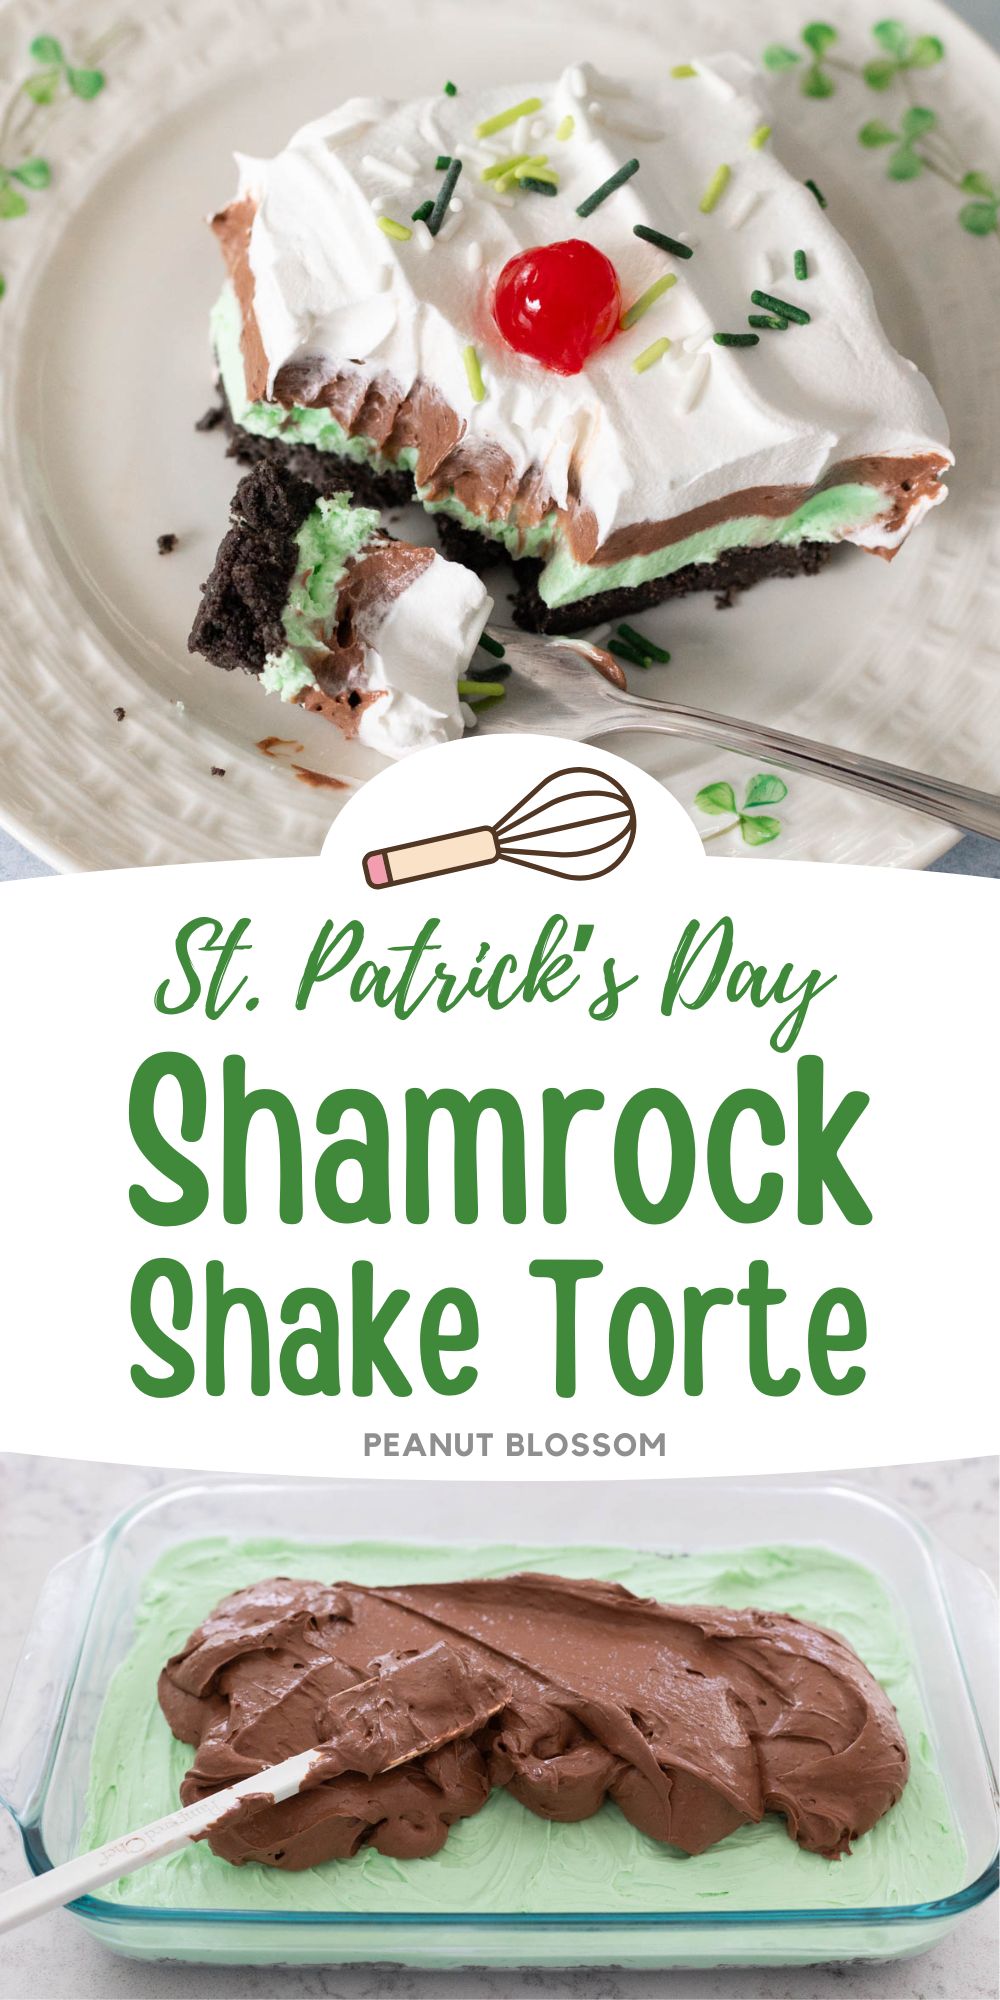 The shamrock shake torte on an Irish plate next to a photo of the torte being made.